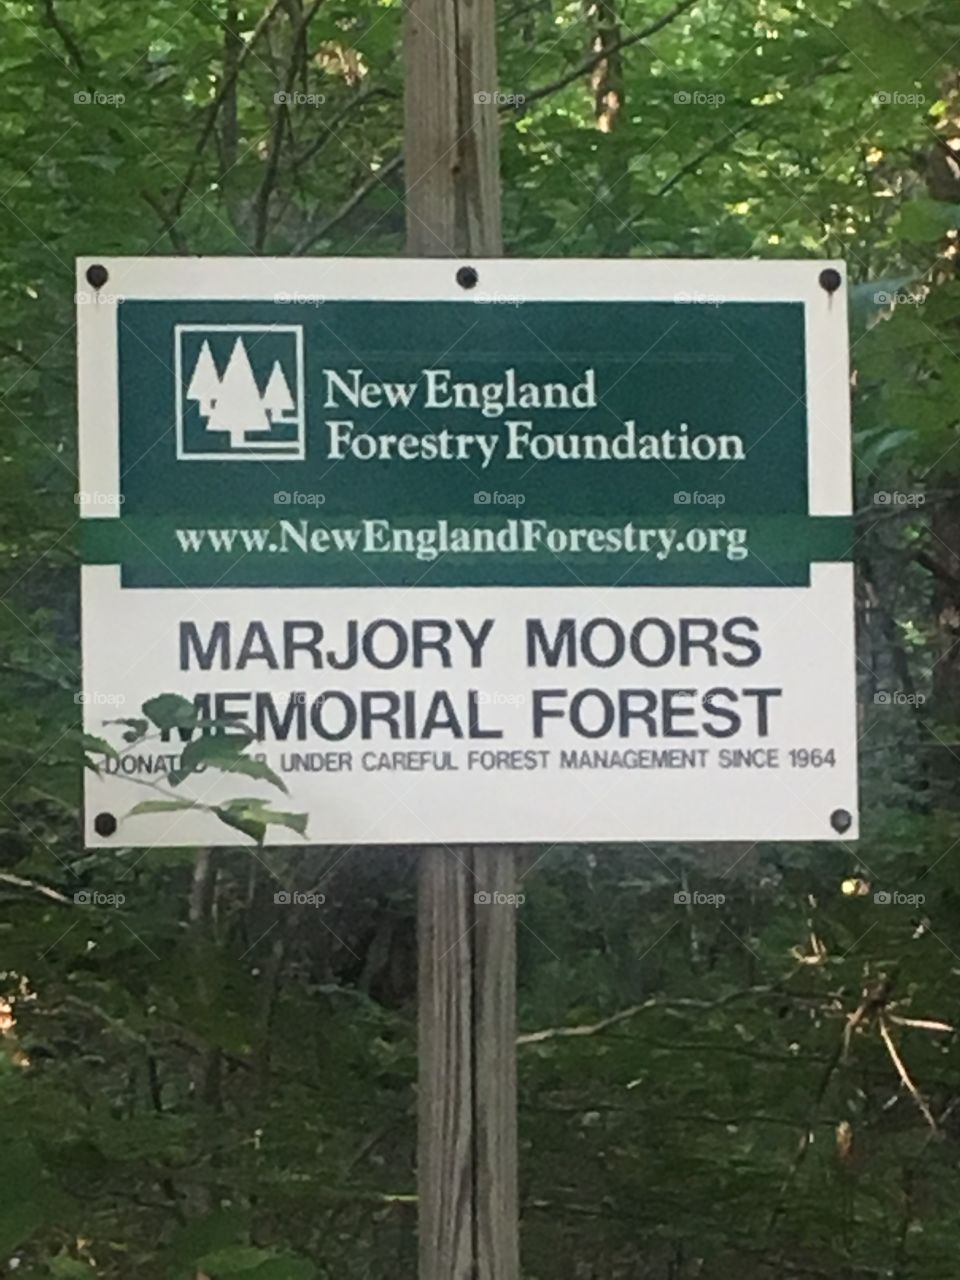 Memorial forest